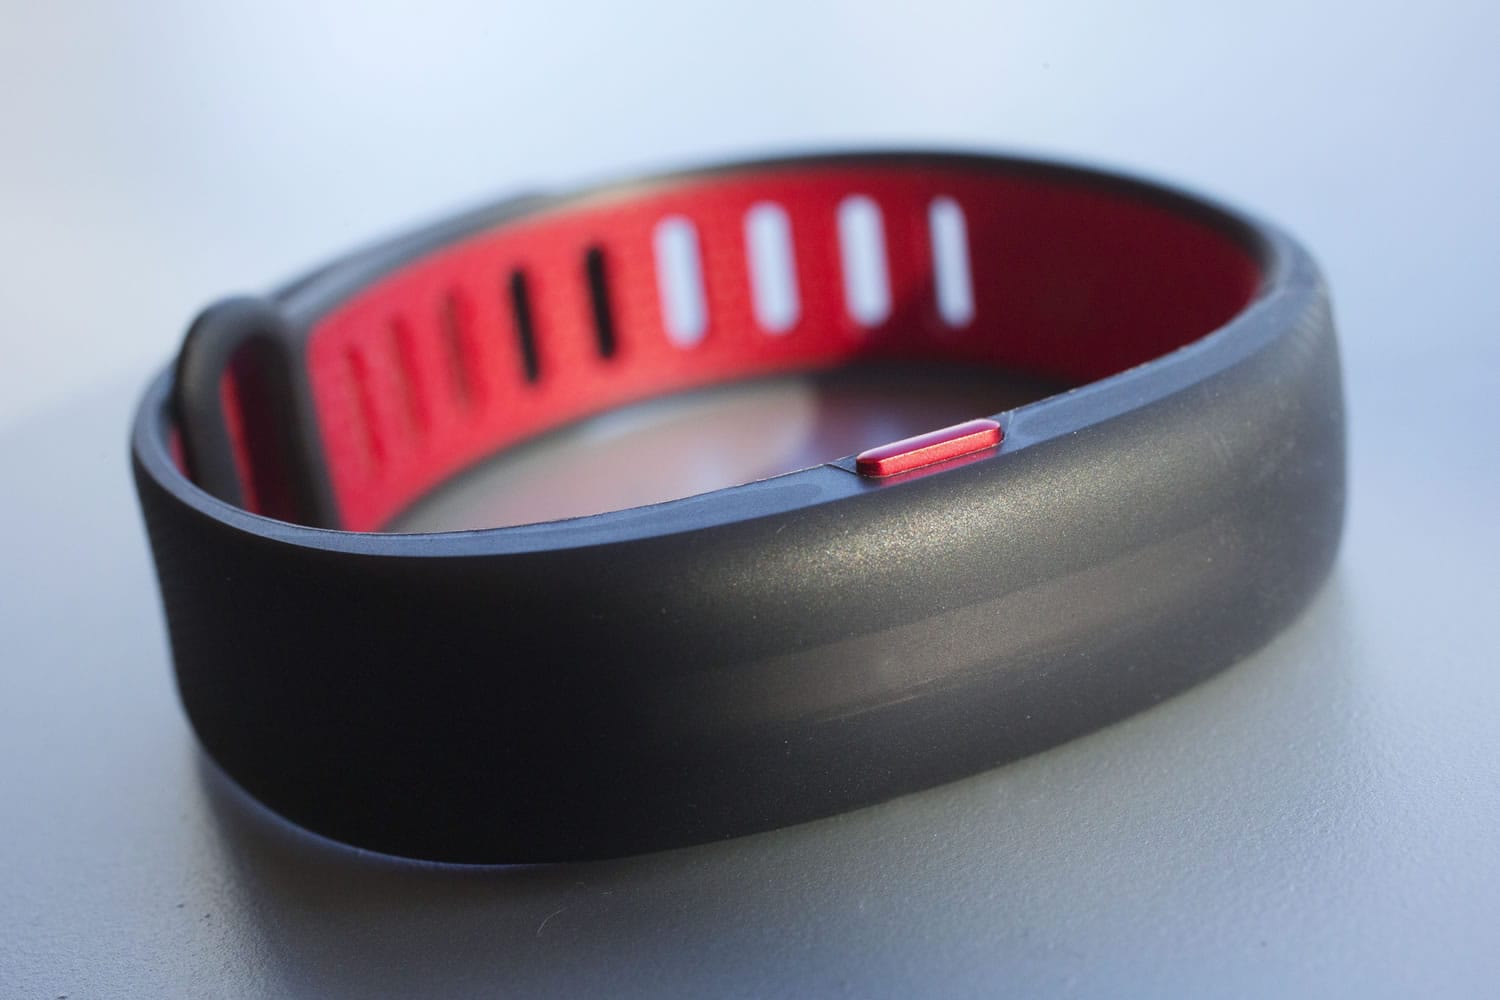 FILE - In this Jan. 4, 2016, file photo, the Under Armour Band is displayed in New York. The wrist band tracks steps, distance, resting heart rate and sleep.